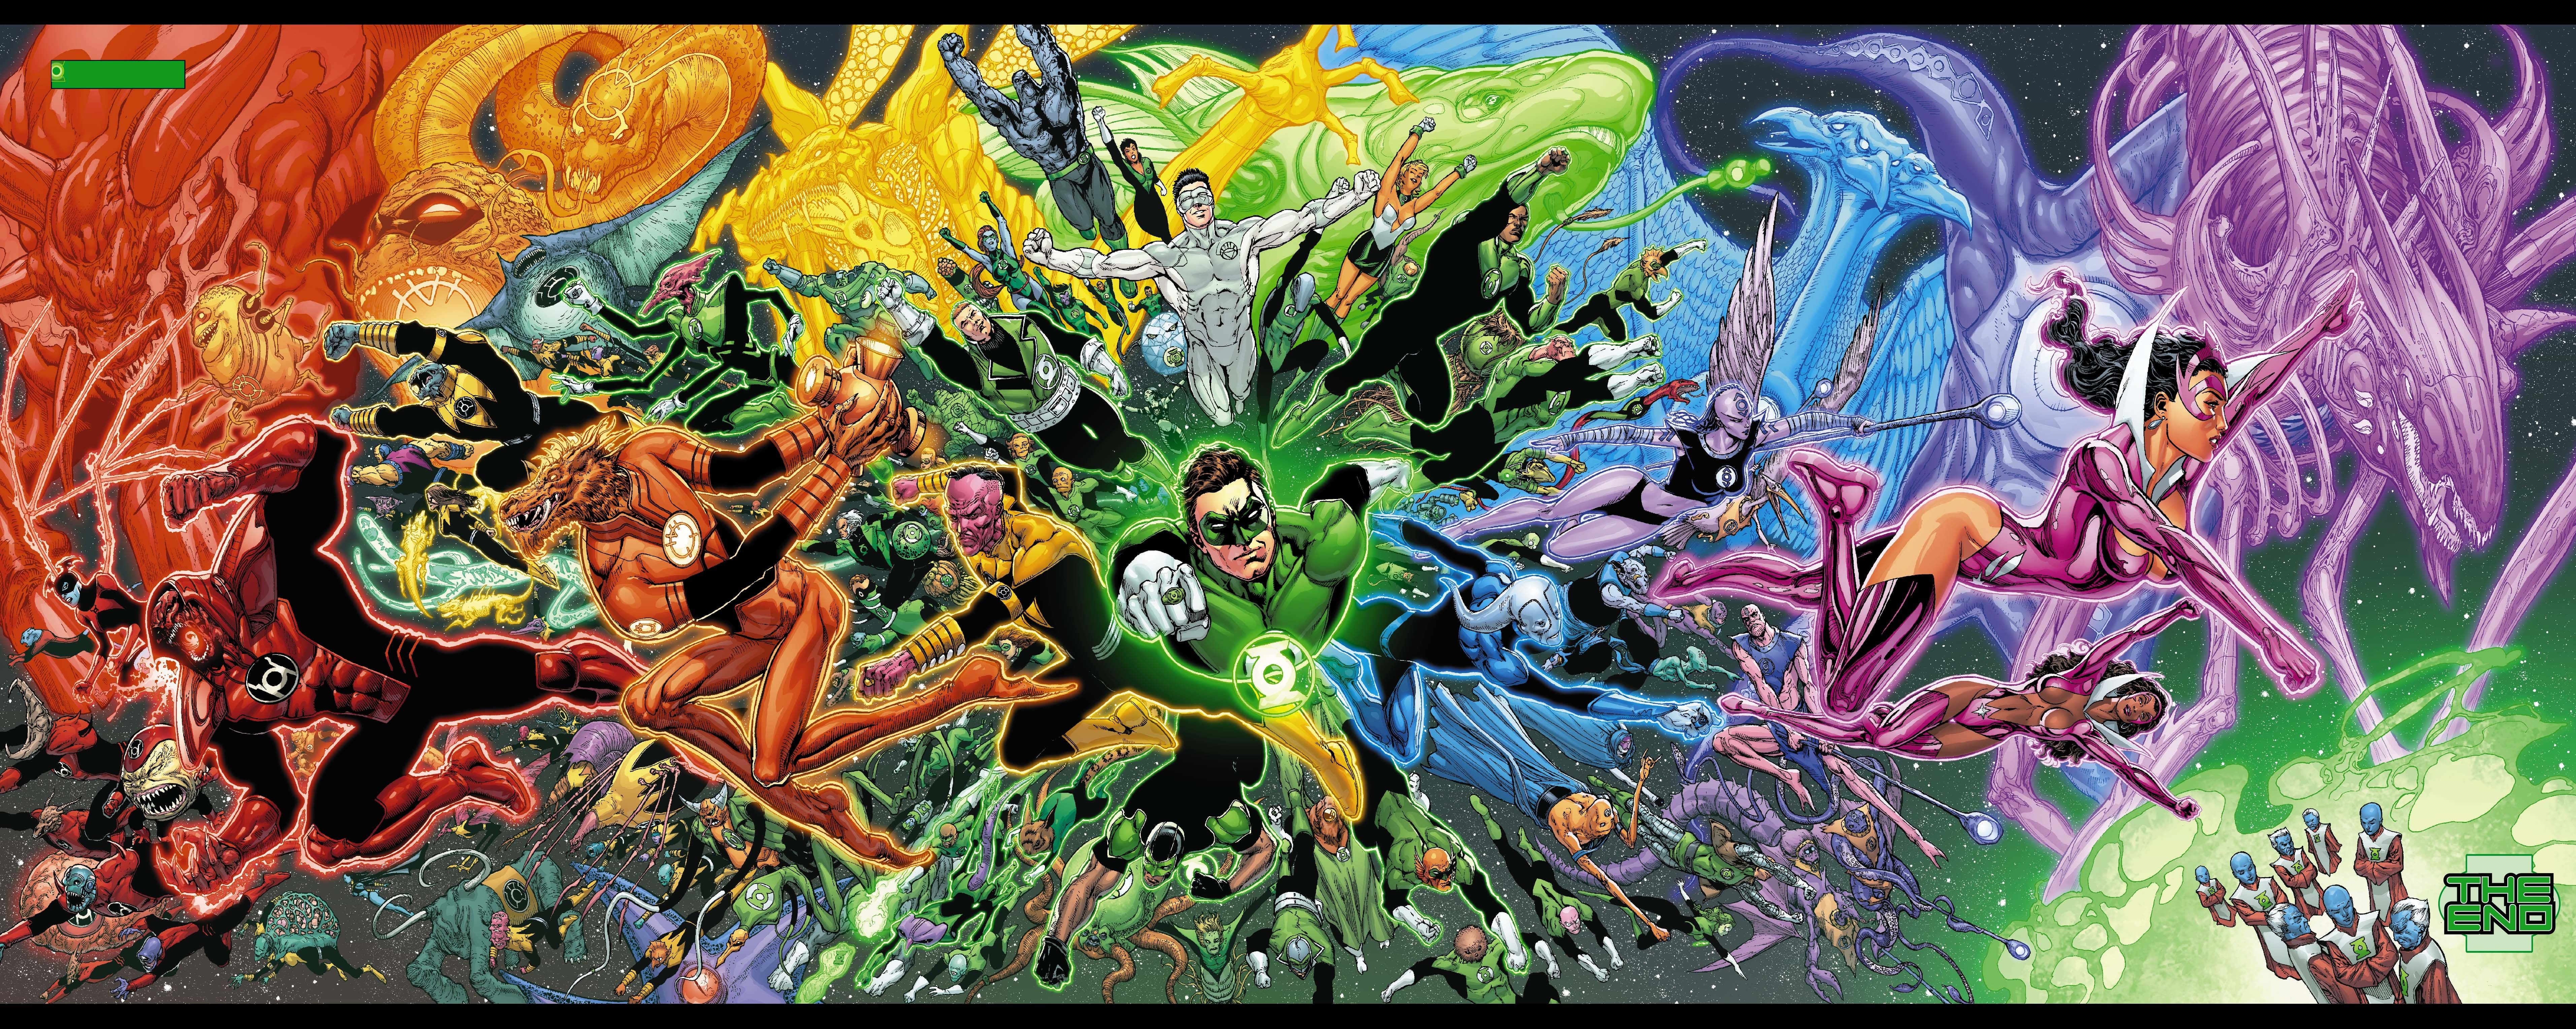 SDCC 2015: 'GREEN LANTERN CORPS' MOVIE ANNOUNCED, SO YOU WON'T CONFUSE IT WITH THAT LAST GL MOVIE